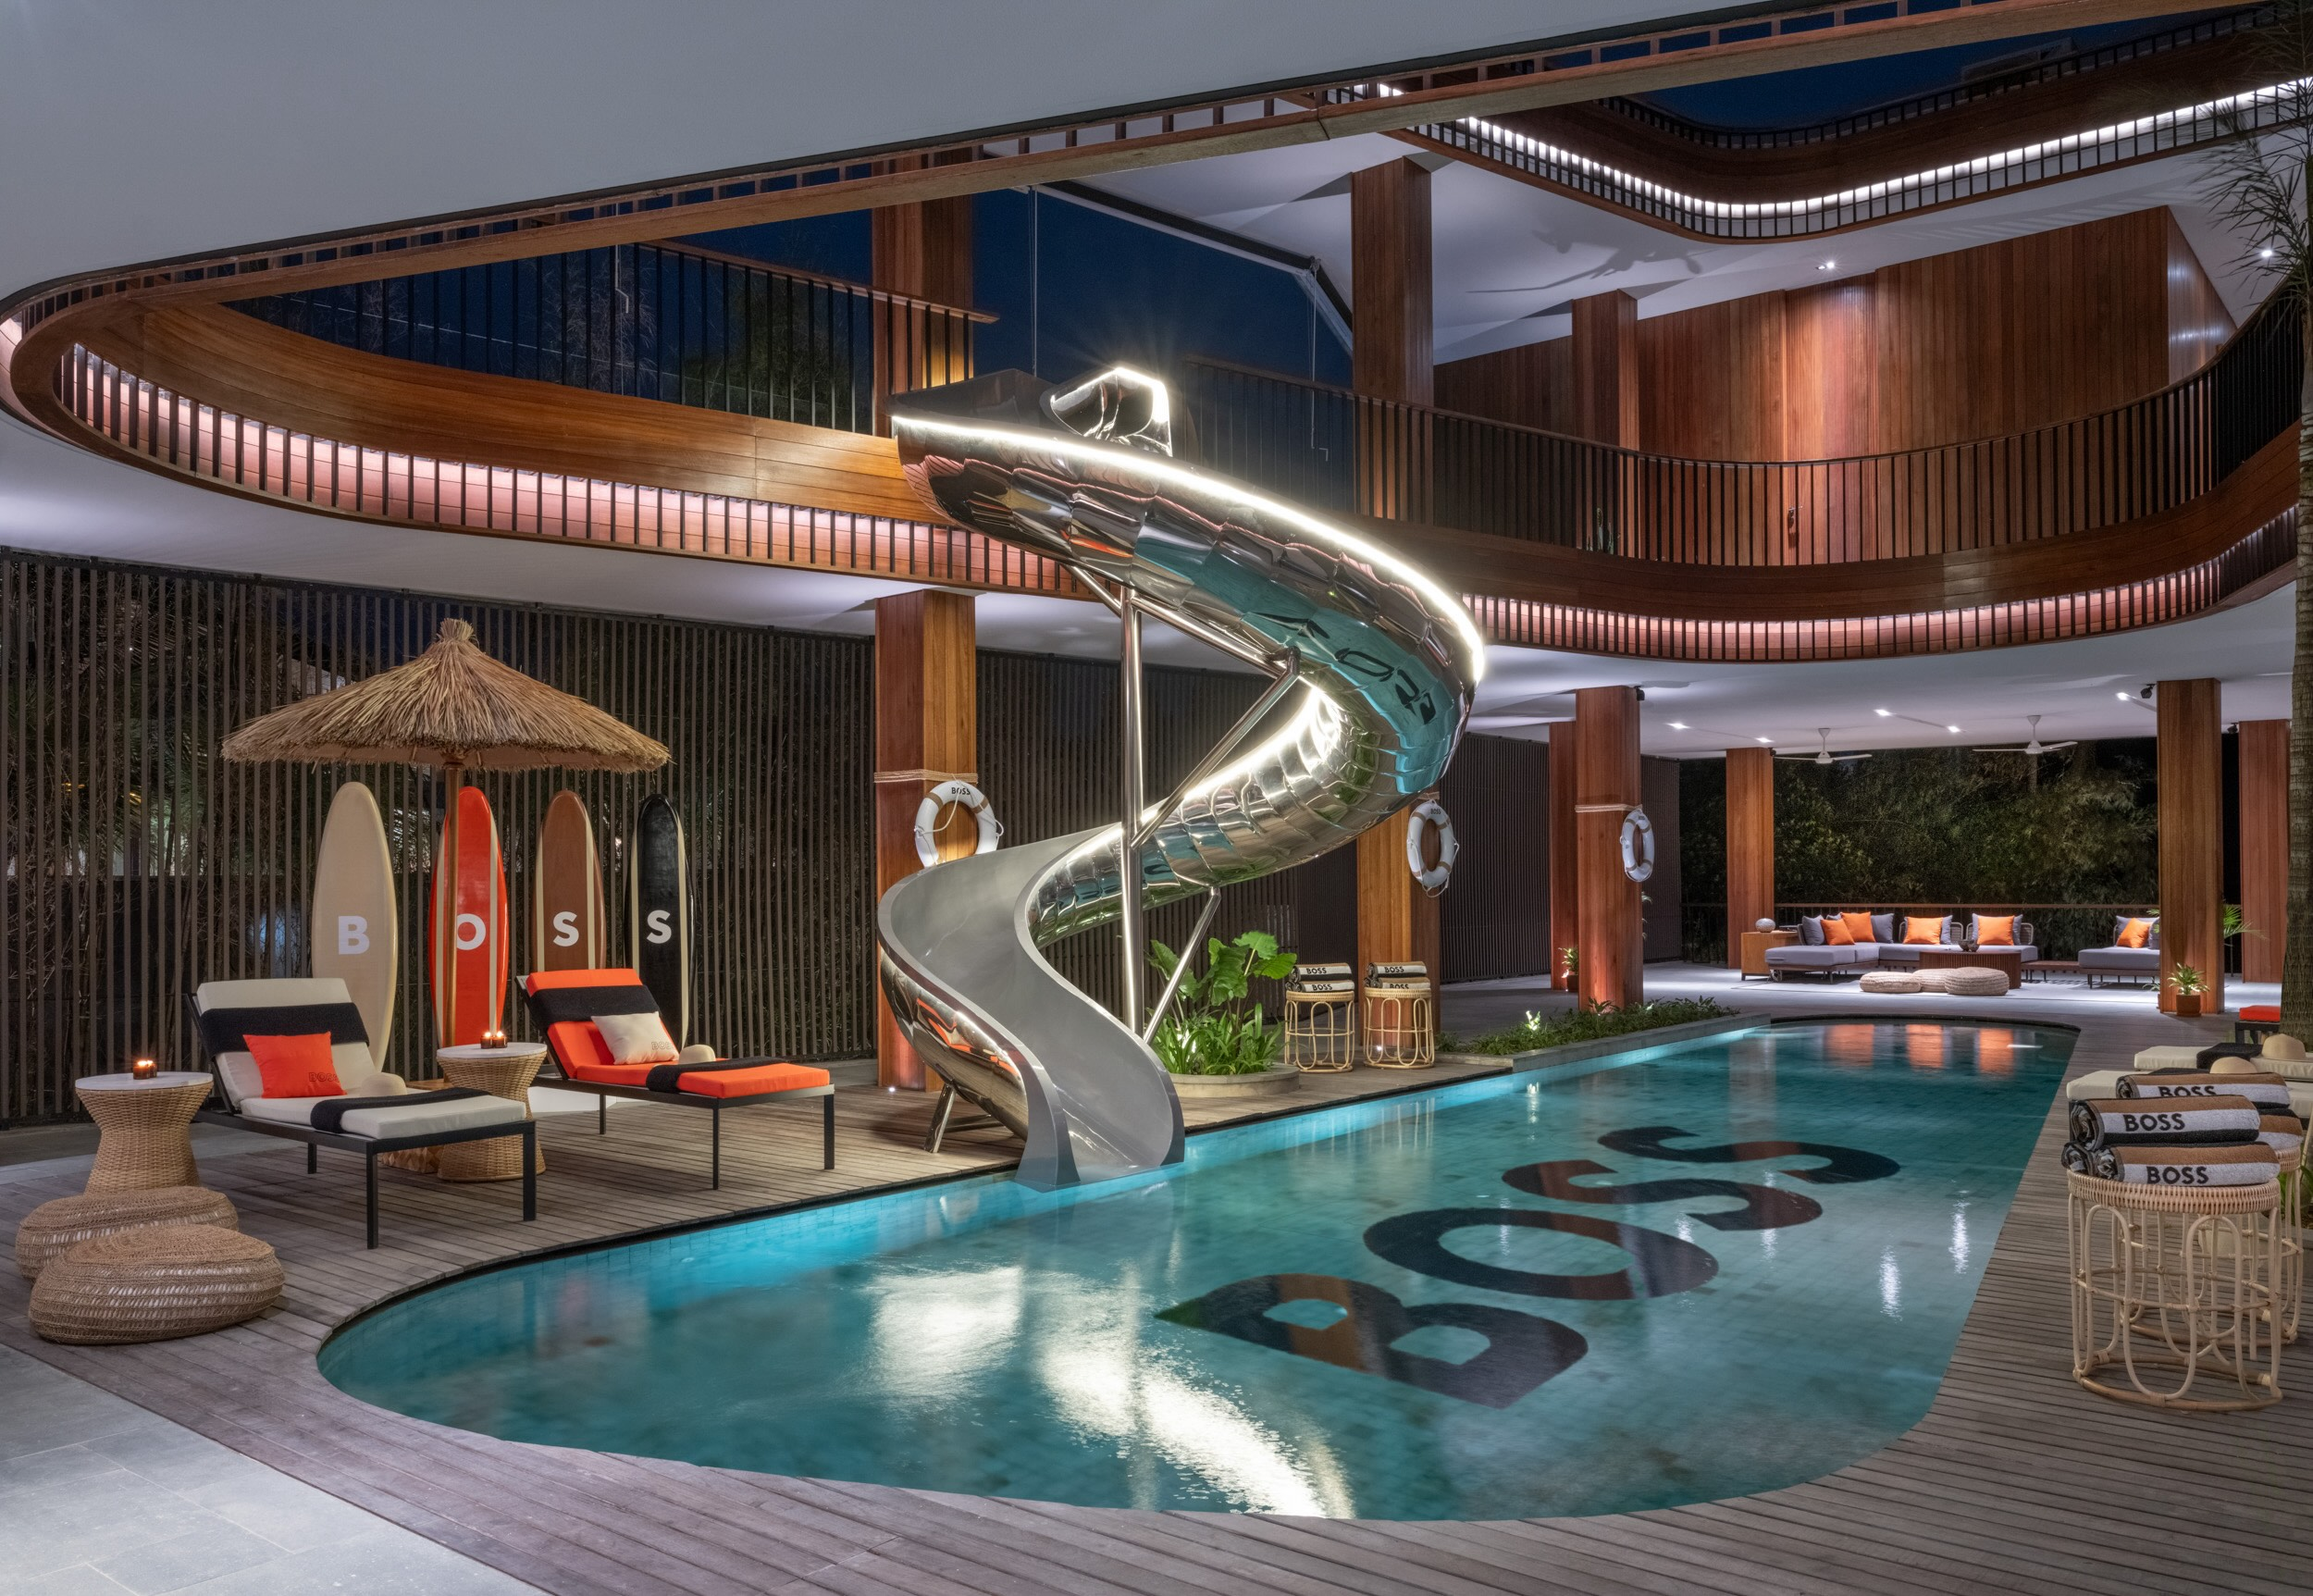 Boss fully steps into the lifestyle business through its luxurious villa, Boss House Bali